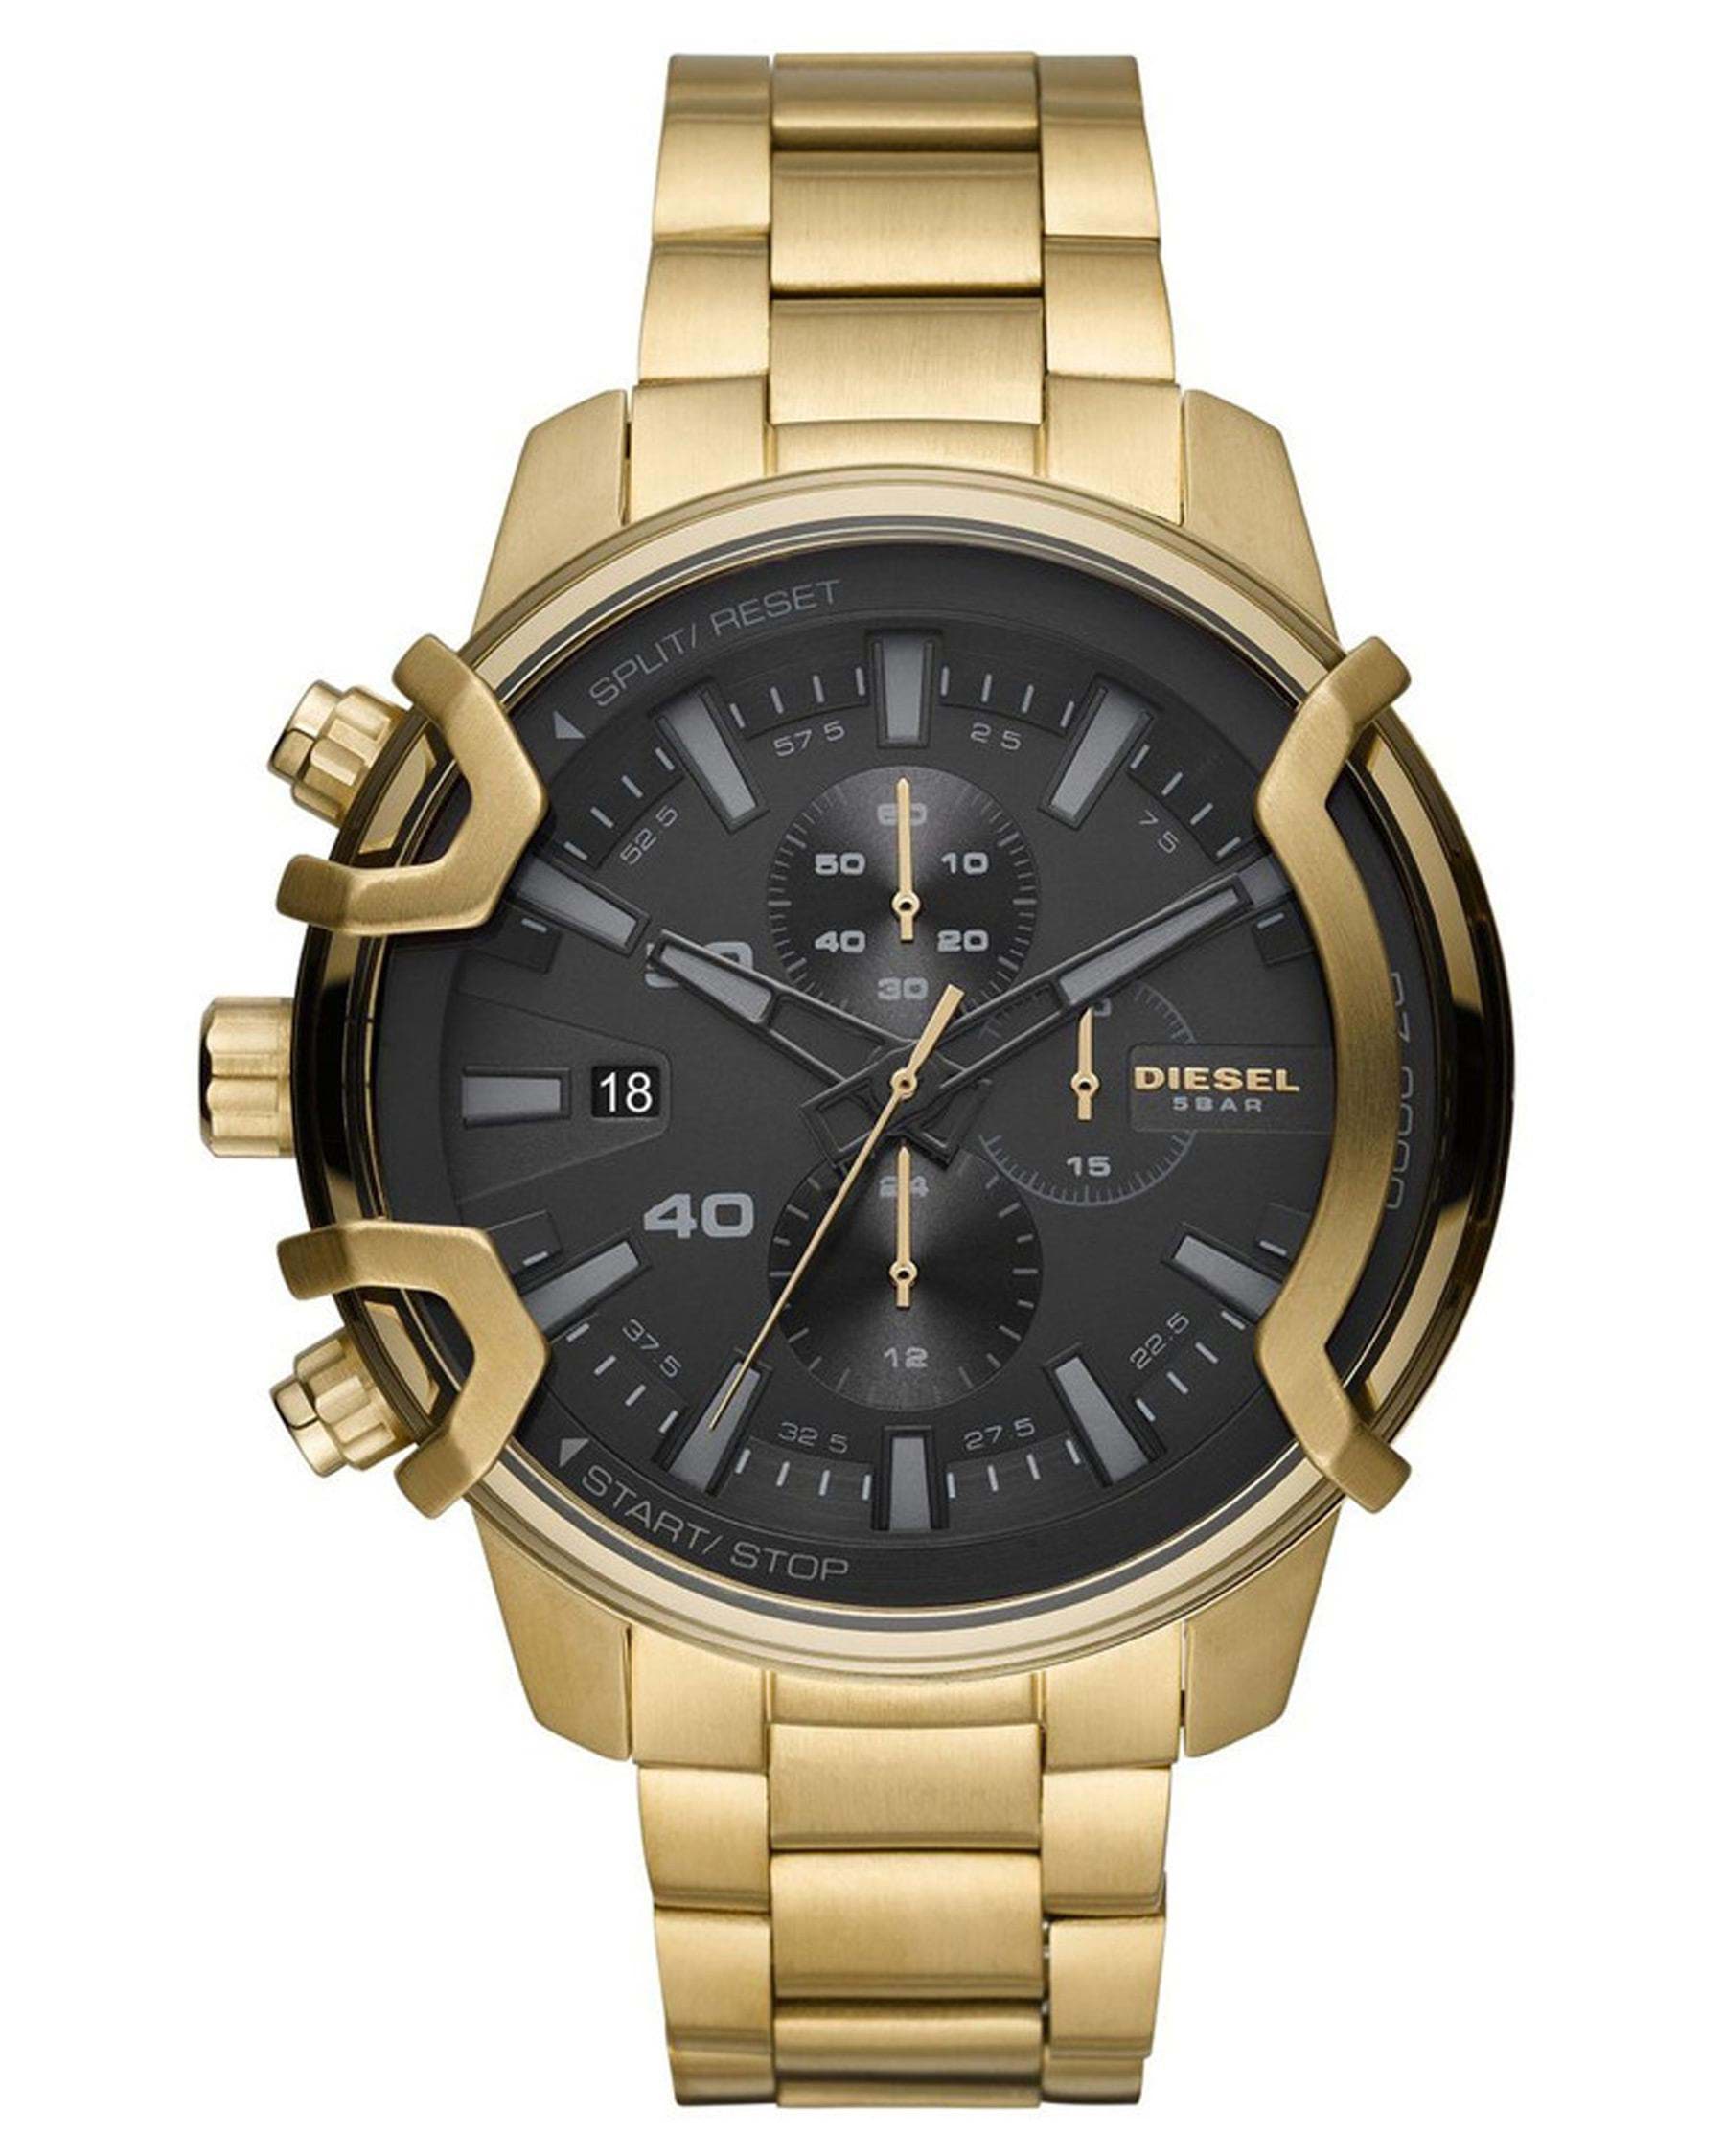 Diesel Griffed Watch In Gold/black - Fast Shipping & Easy Returns ...